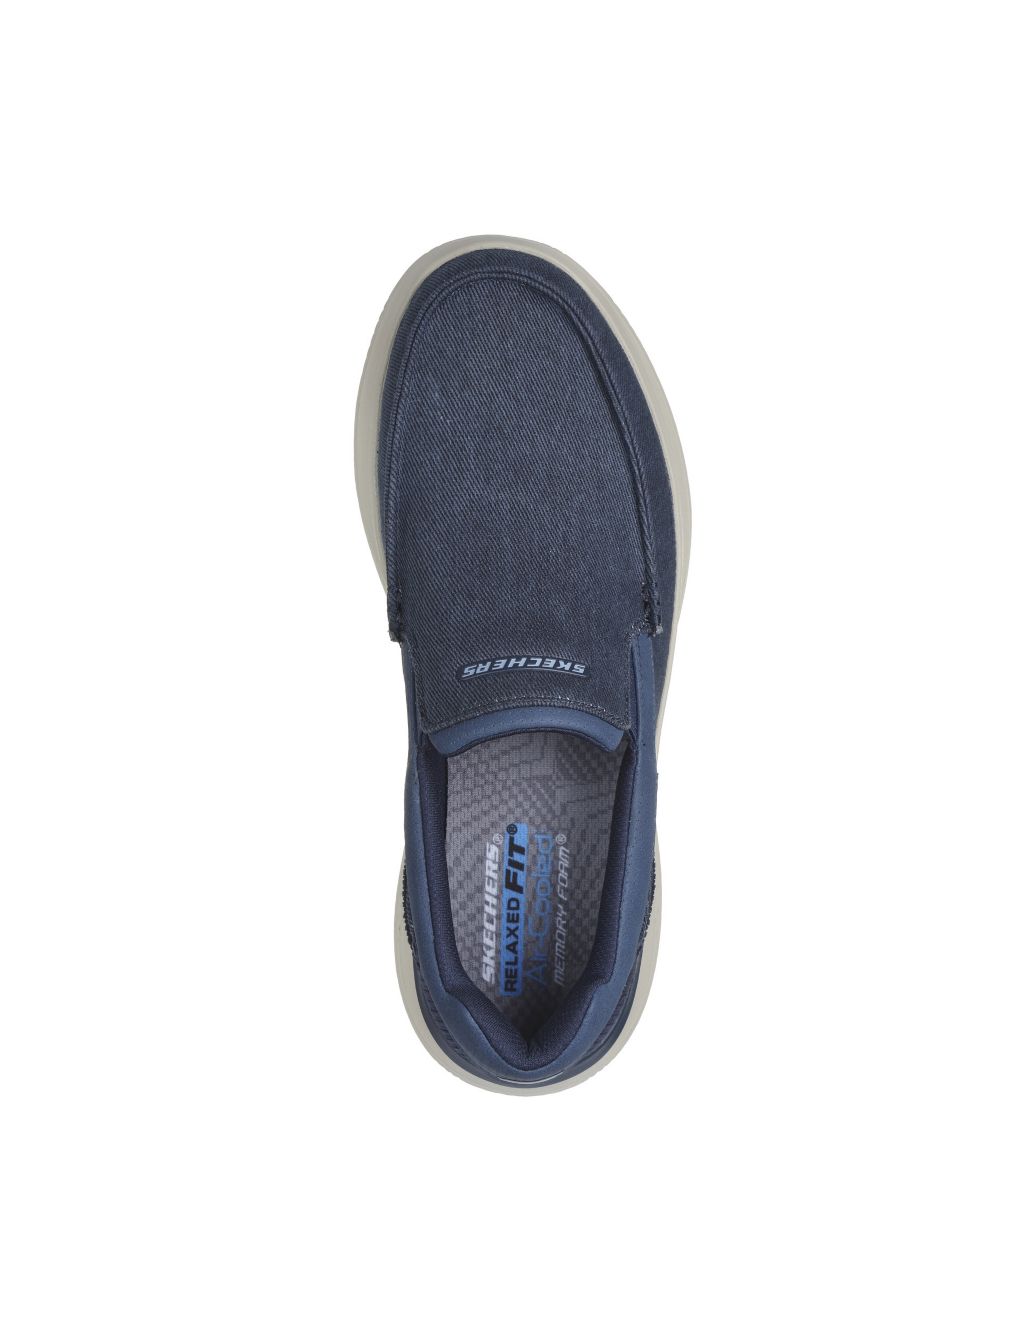 Hasting Fielden Slip-On Trainers 4 of 5